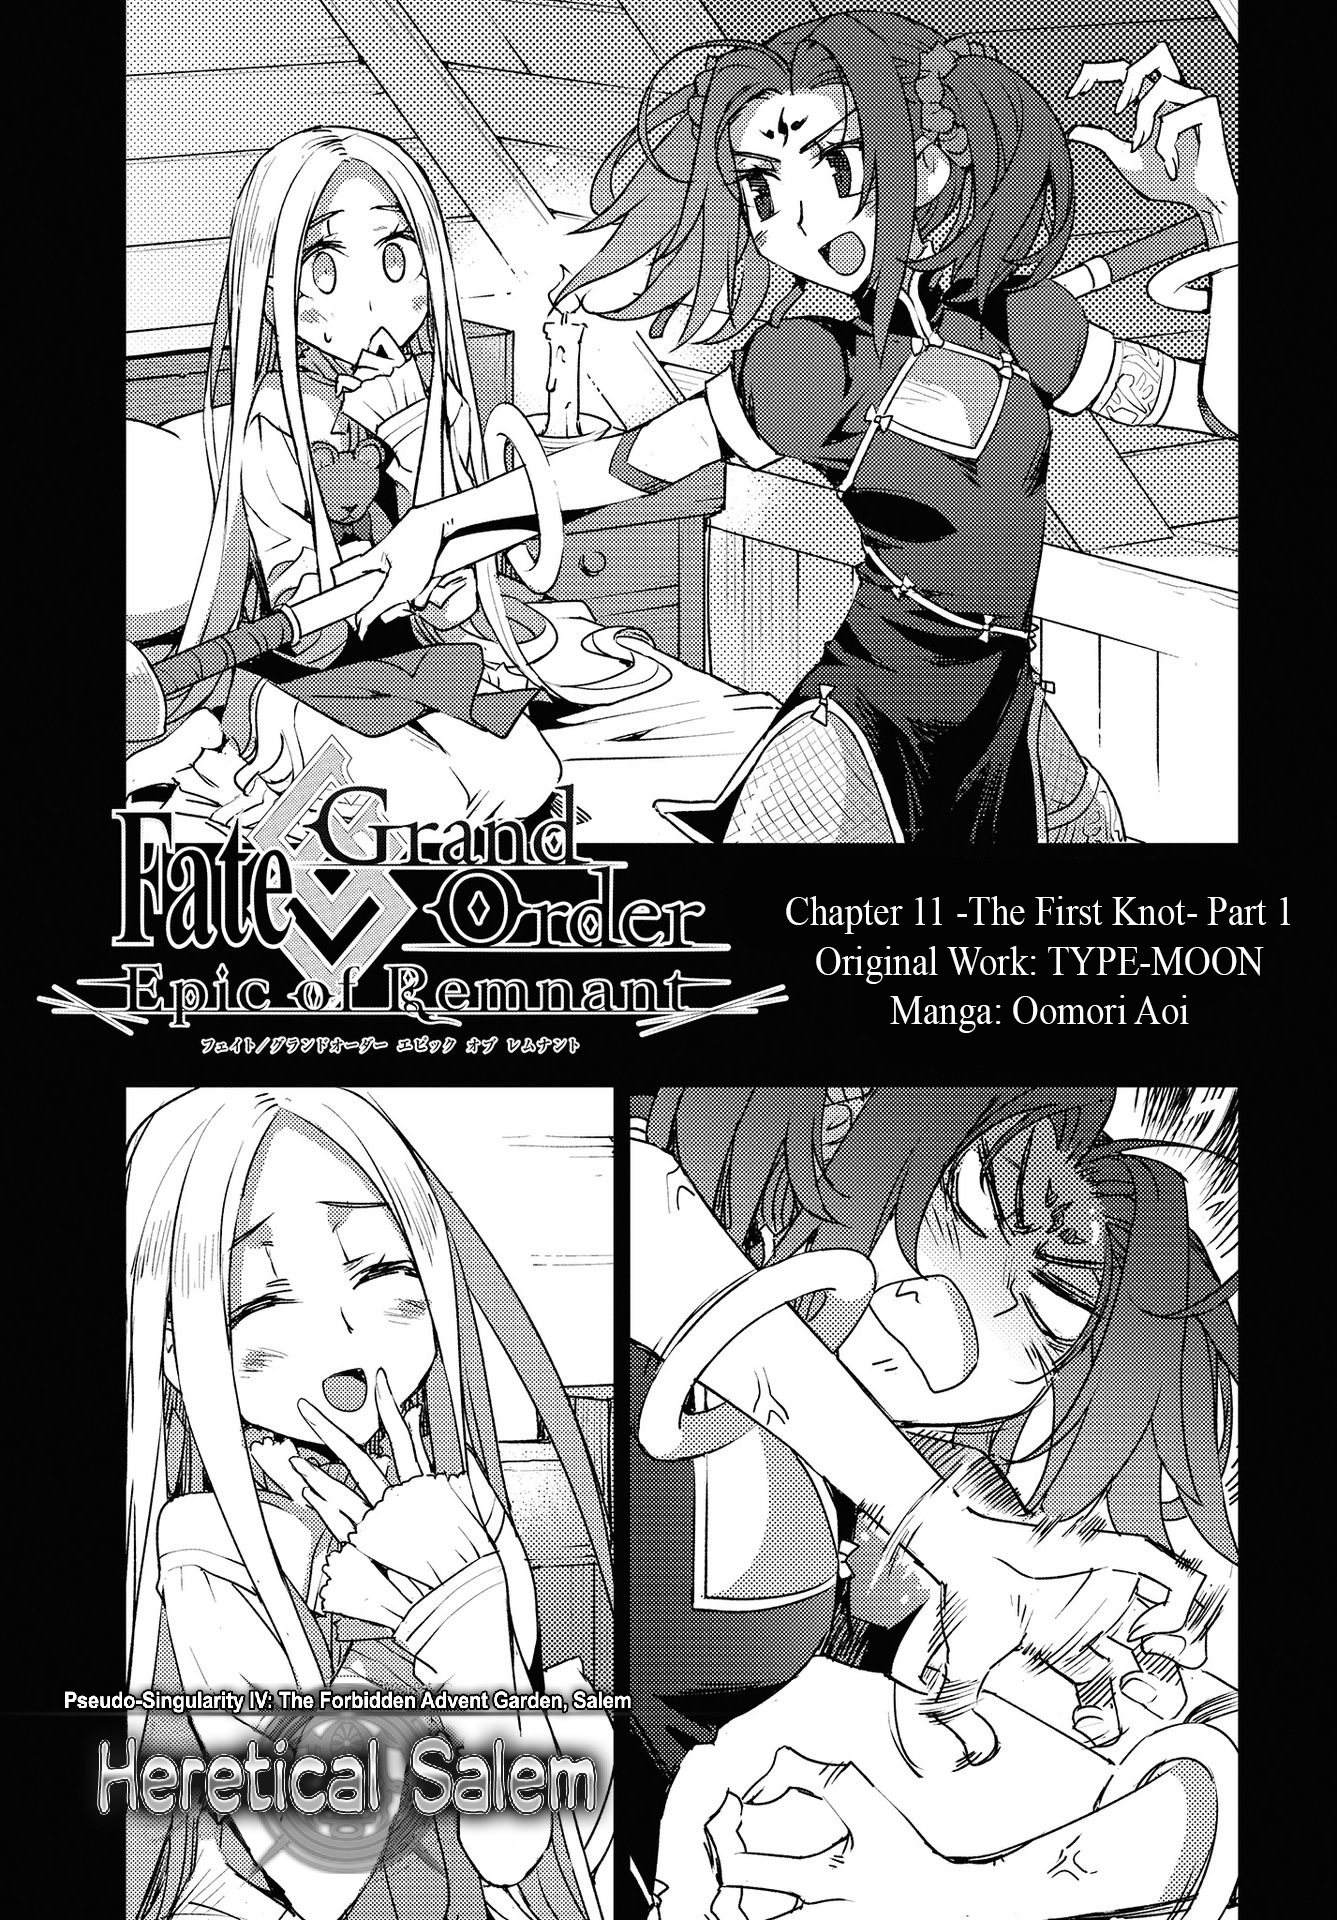 Fate/grand Order: Epic Of Remnant: Pseudo-Singularity Iv: The Forbidden Advent Garden, Salem - Heretical Salem Chapter 11: The First Knot 1 - Picture 1